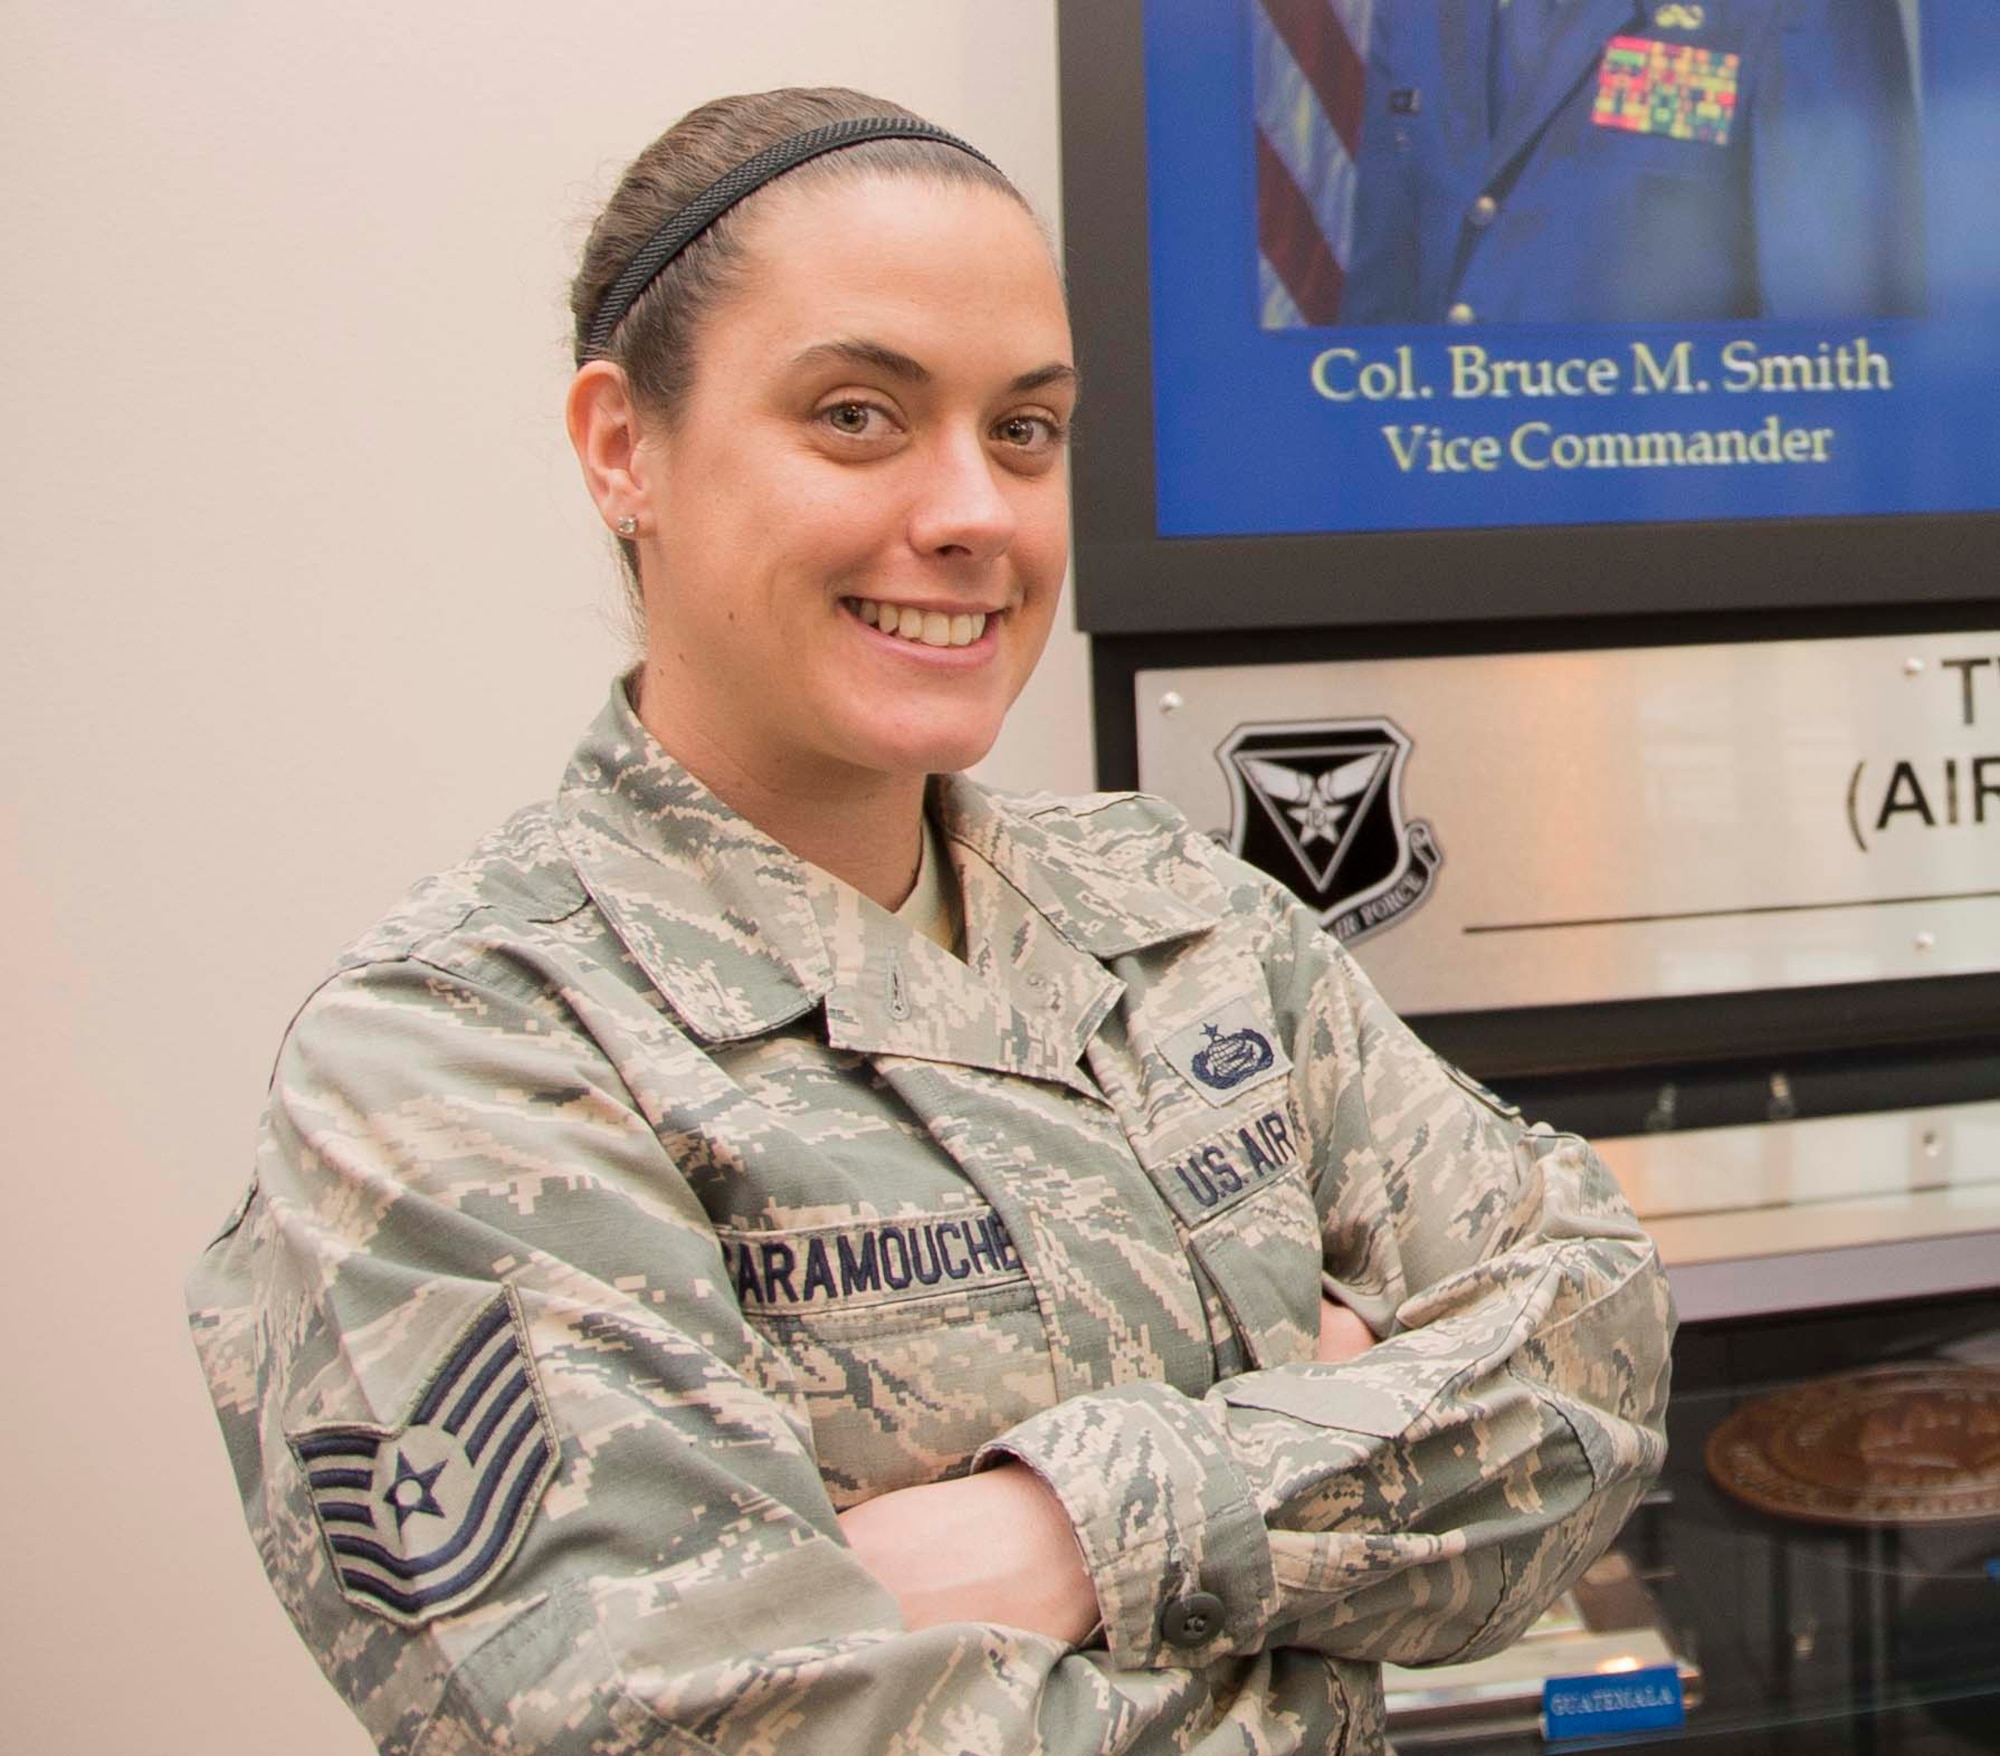 Tech Sgt. Diana Scaramouche, 12th Air Force (Air Forces Southern) Command Chief Executive Assistant, smiles before going around and engaging with other noncommissioned officers on Jan. 08, 2014 at Davis-Monthan AFB, Ariz. Some of her day-to-day duties include coordinating or researching a multitude of taskers involving the enlisted force at the eight wings and one direct reporting unit that fall under 12 Air Force (Air Forces Southern). (U.S. Air Force photo by Staff Sgt. Adam Grant/Released)